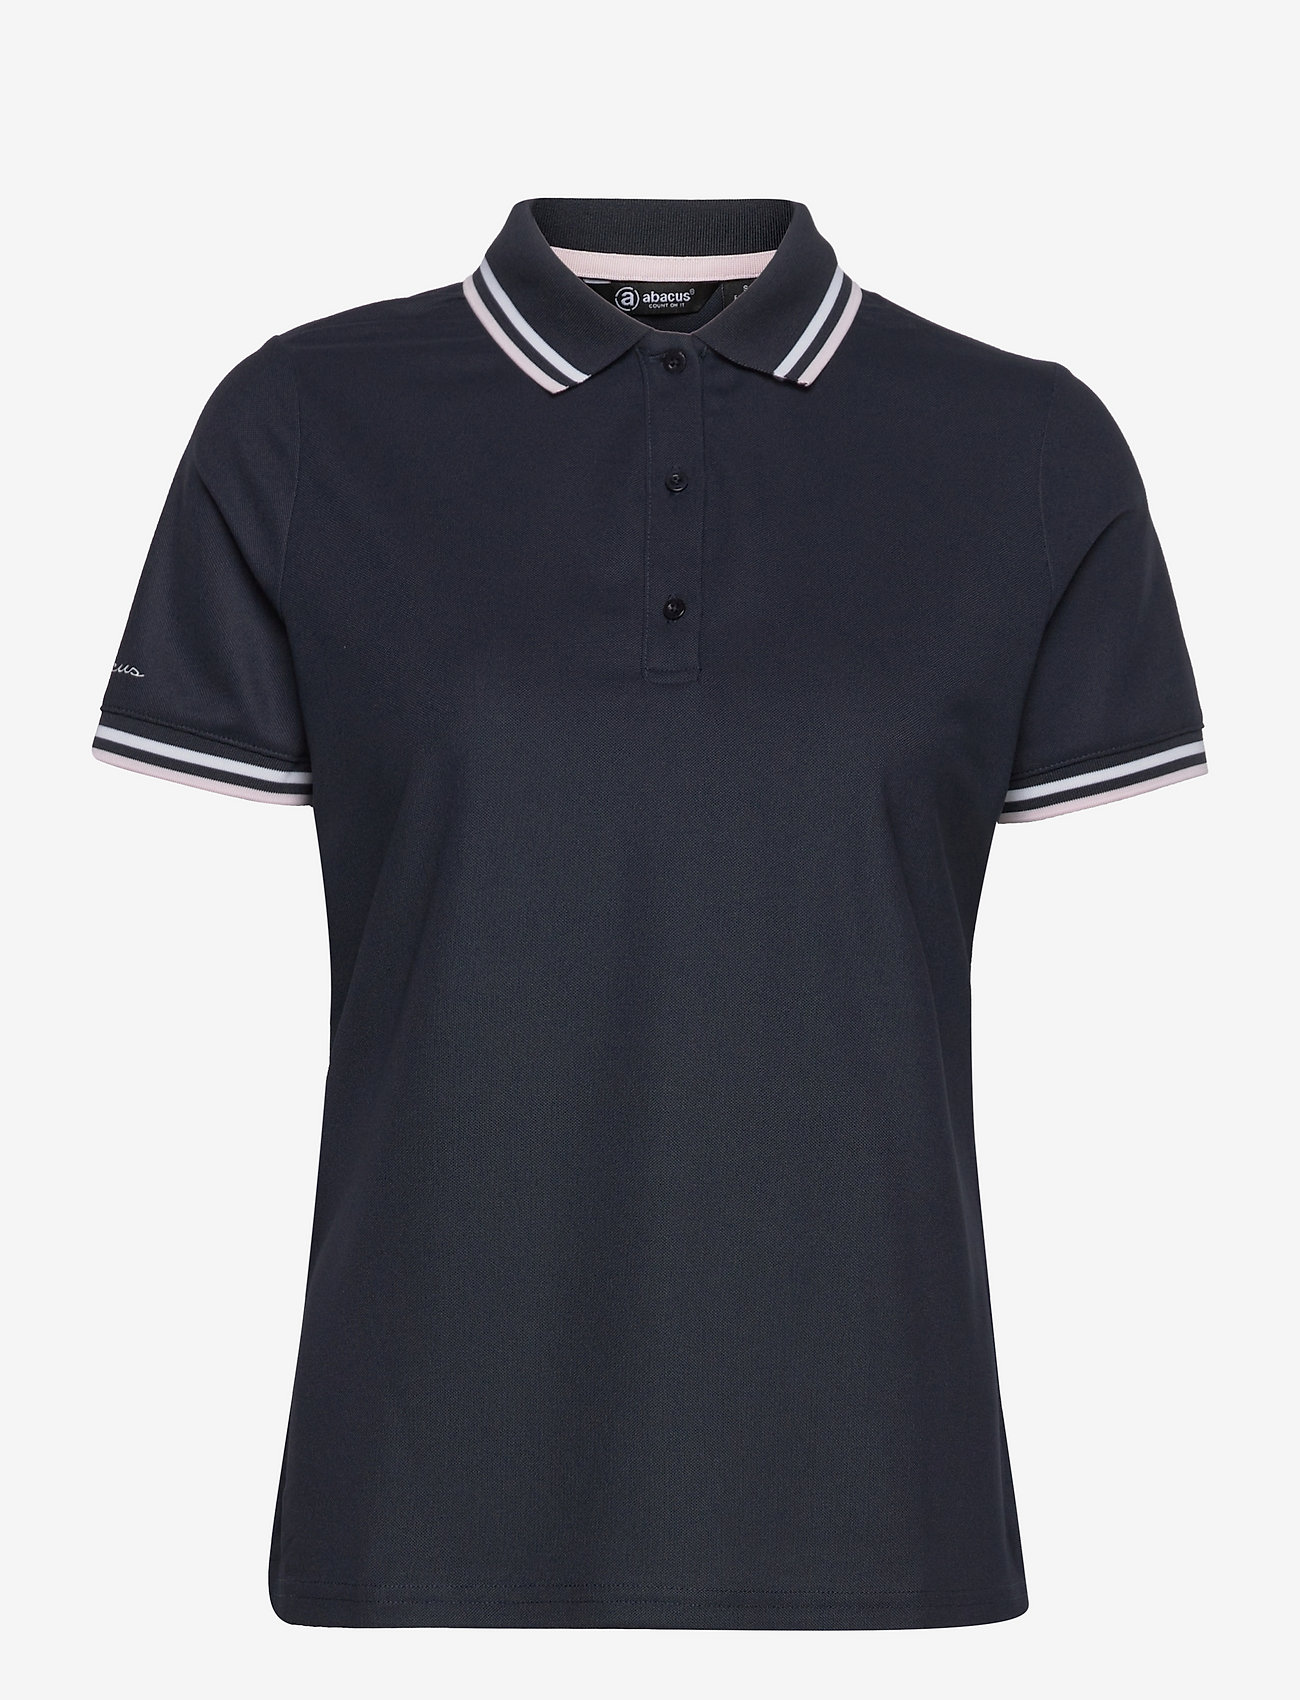 Abacus - Lds Pines polo - pikéer - navy - 0